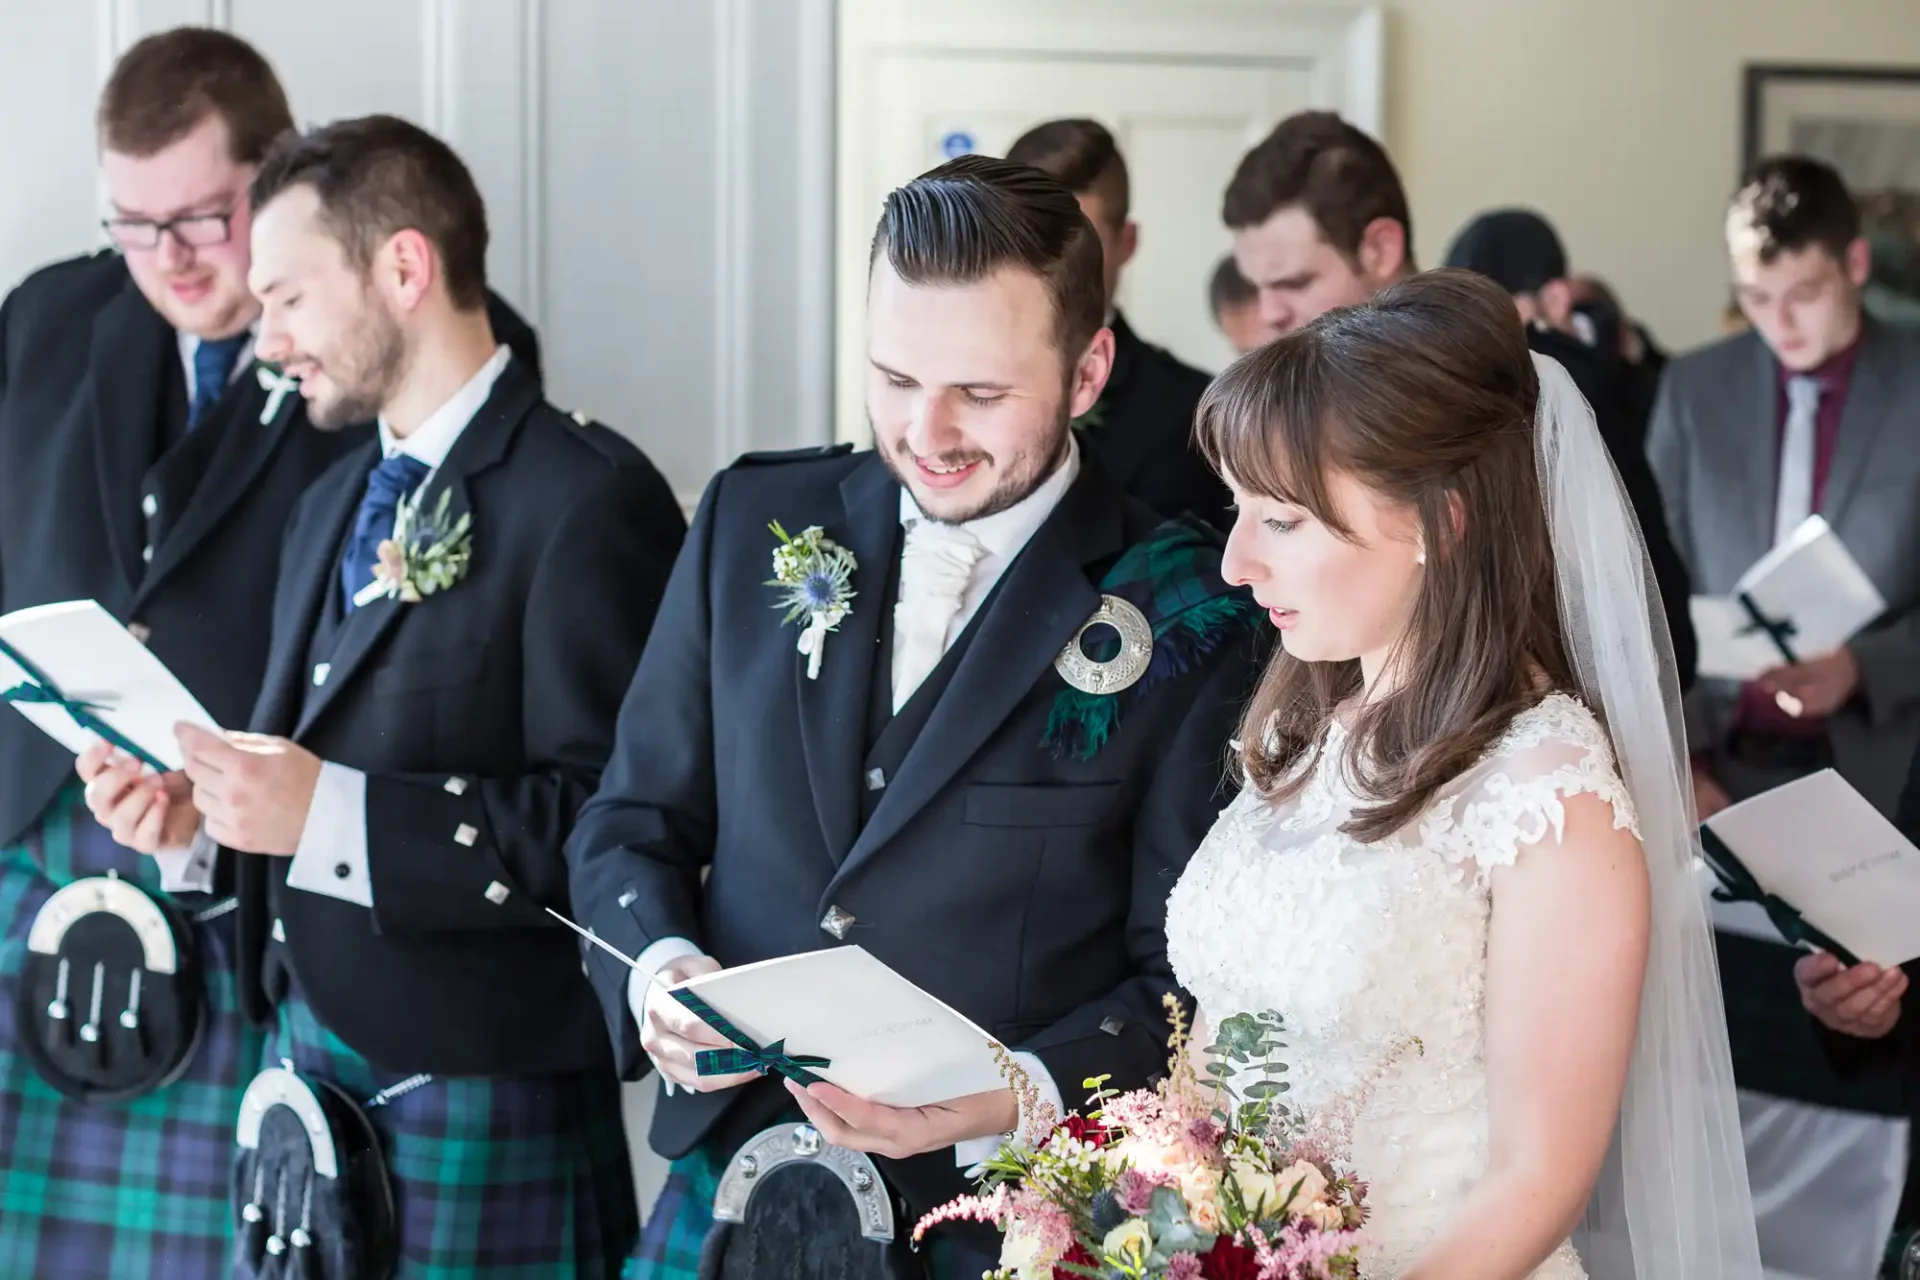 A bride and groom in wedding attire reading from a booklet alongside groomsmen in kilts and suits.